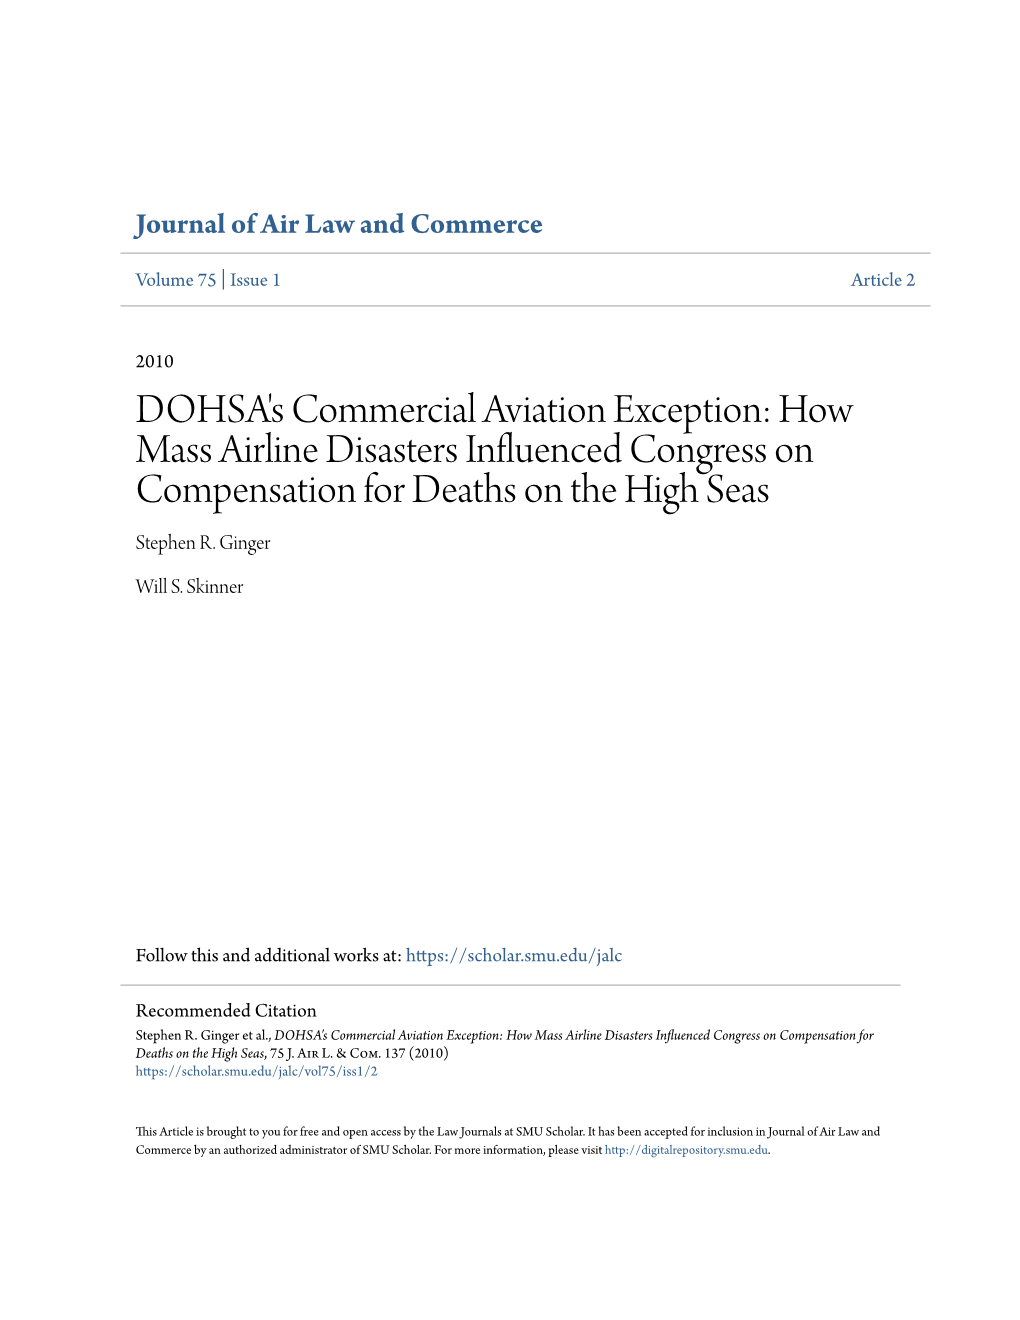 DOHSA's Commercial Aviation Exception: How Mass Airline Disasters Influenced Congress on Compensation for Deaths on the High Seas Stephen R